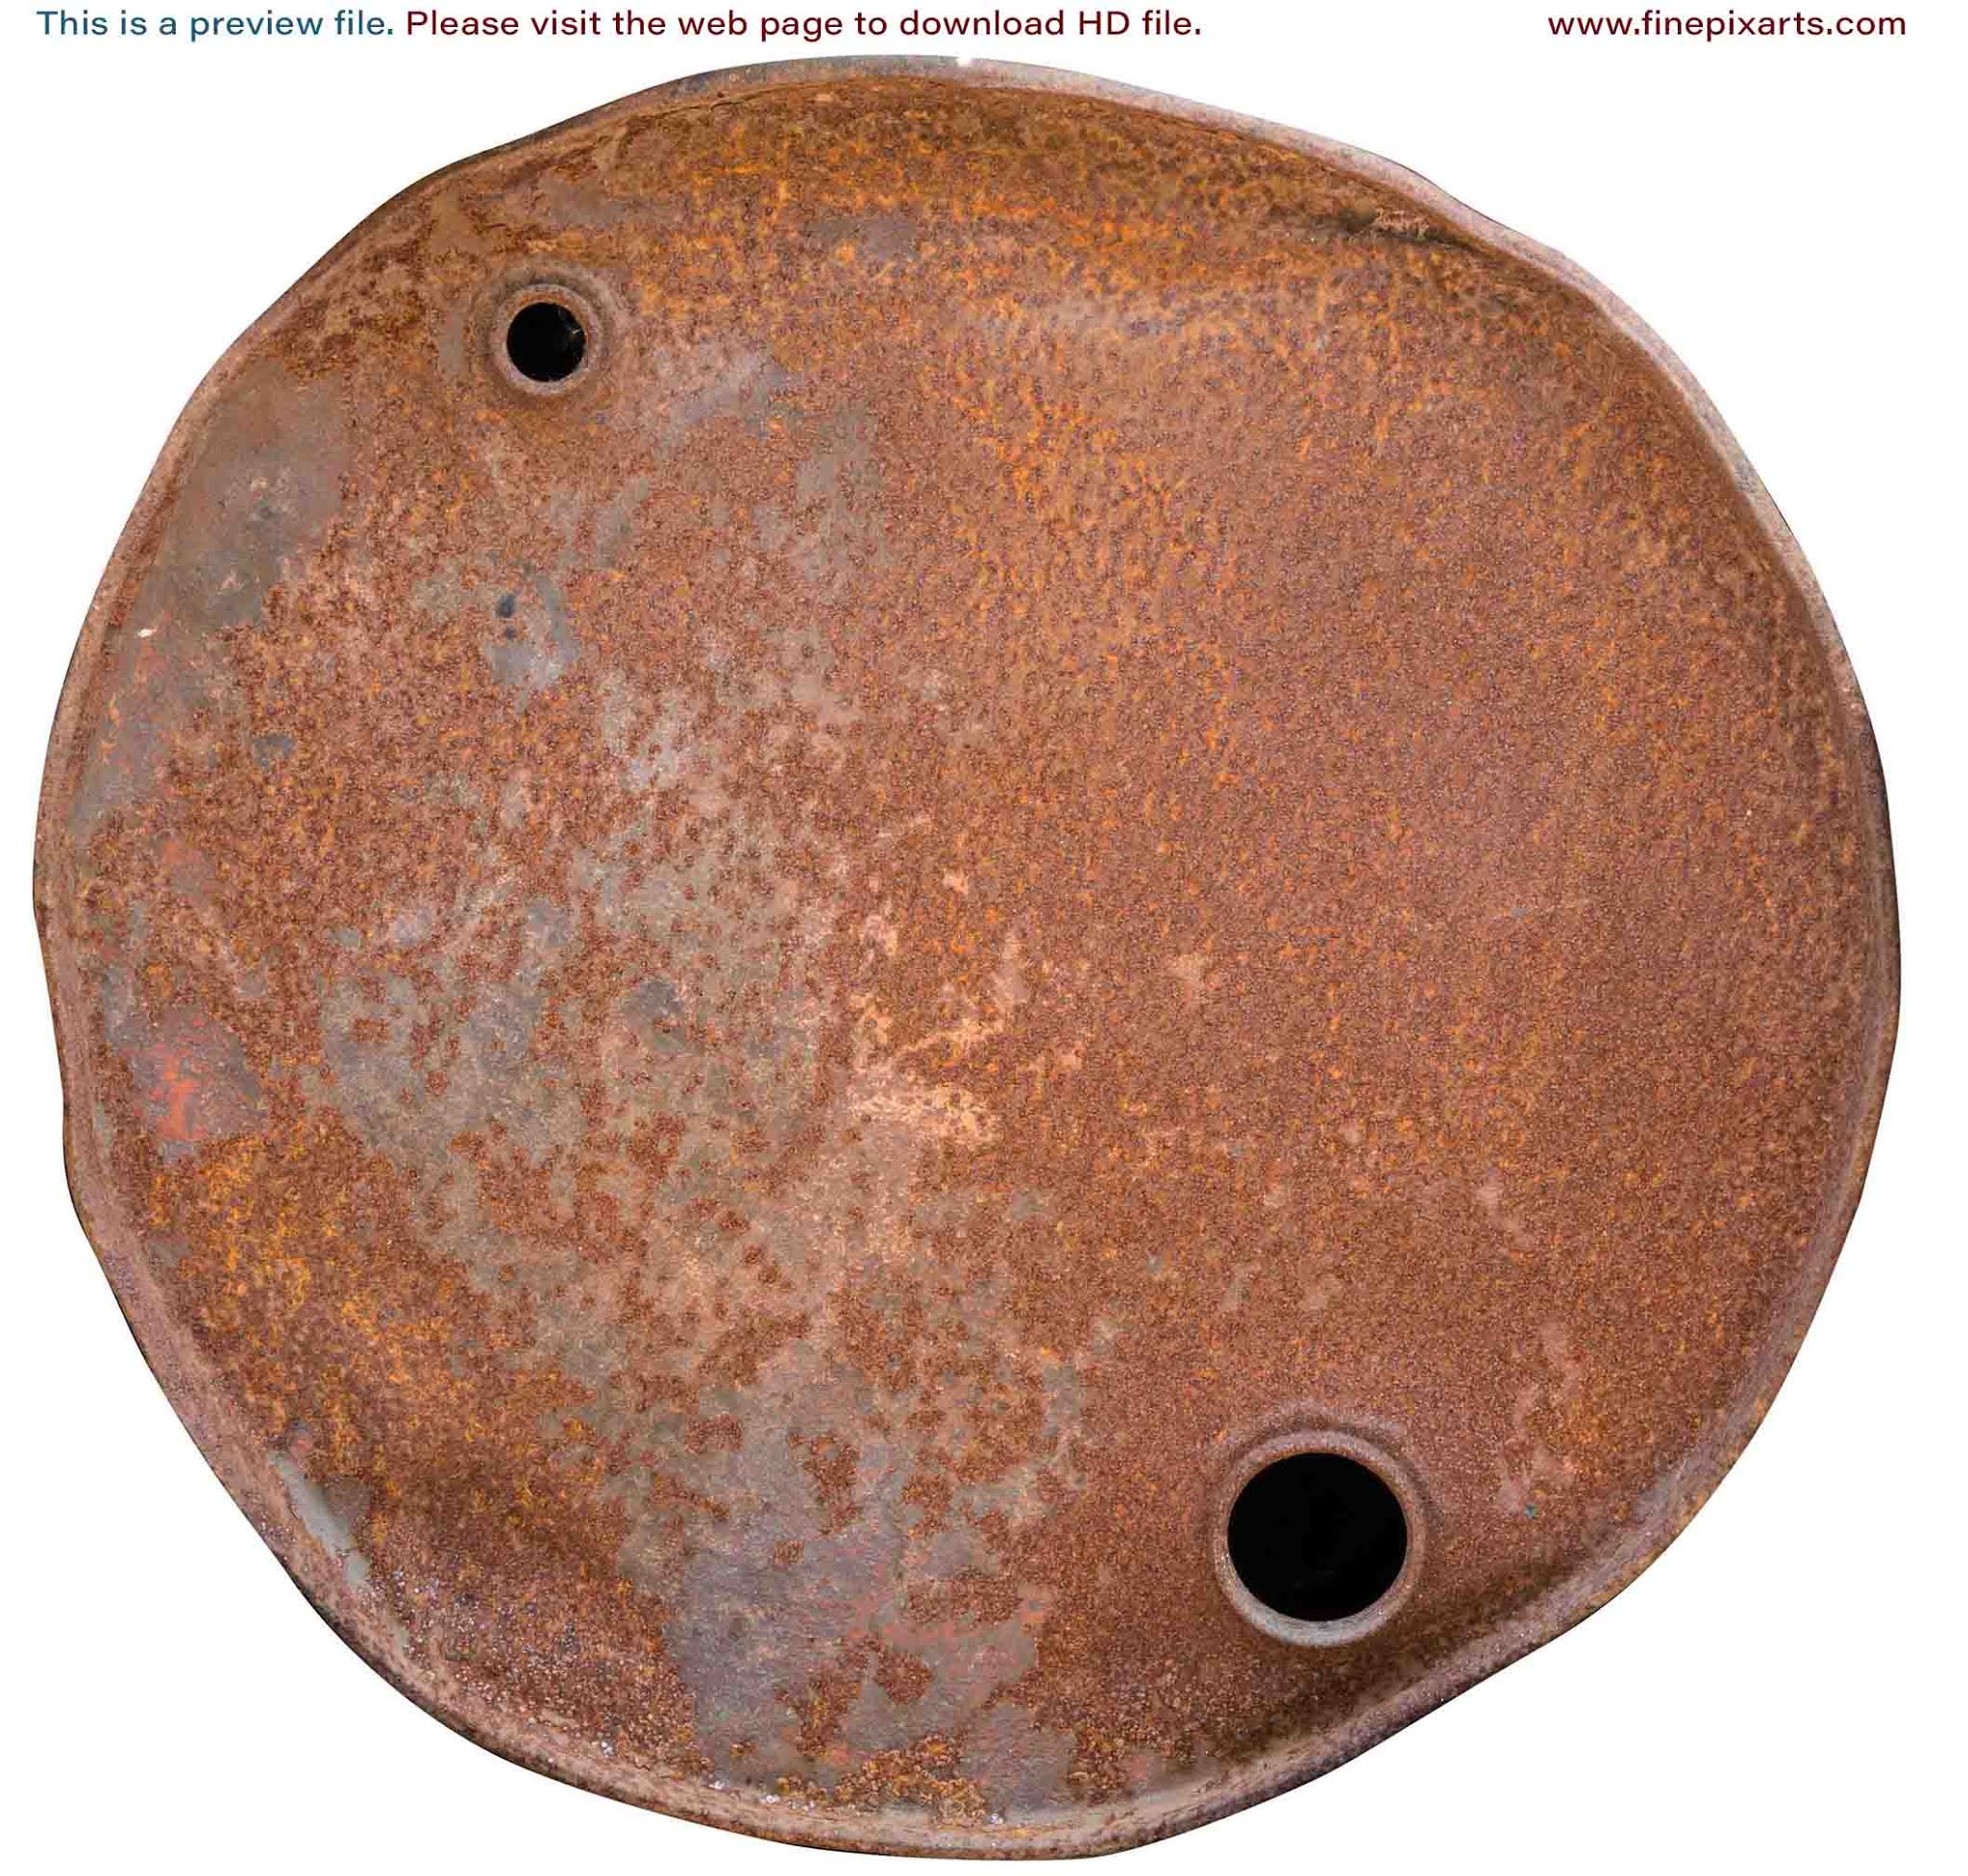 Rusty metal Oil can texture 00001